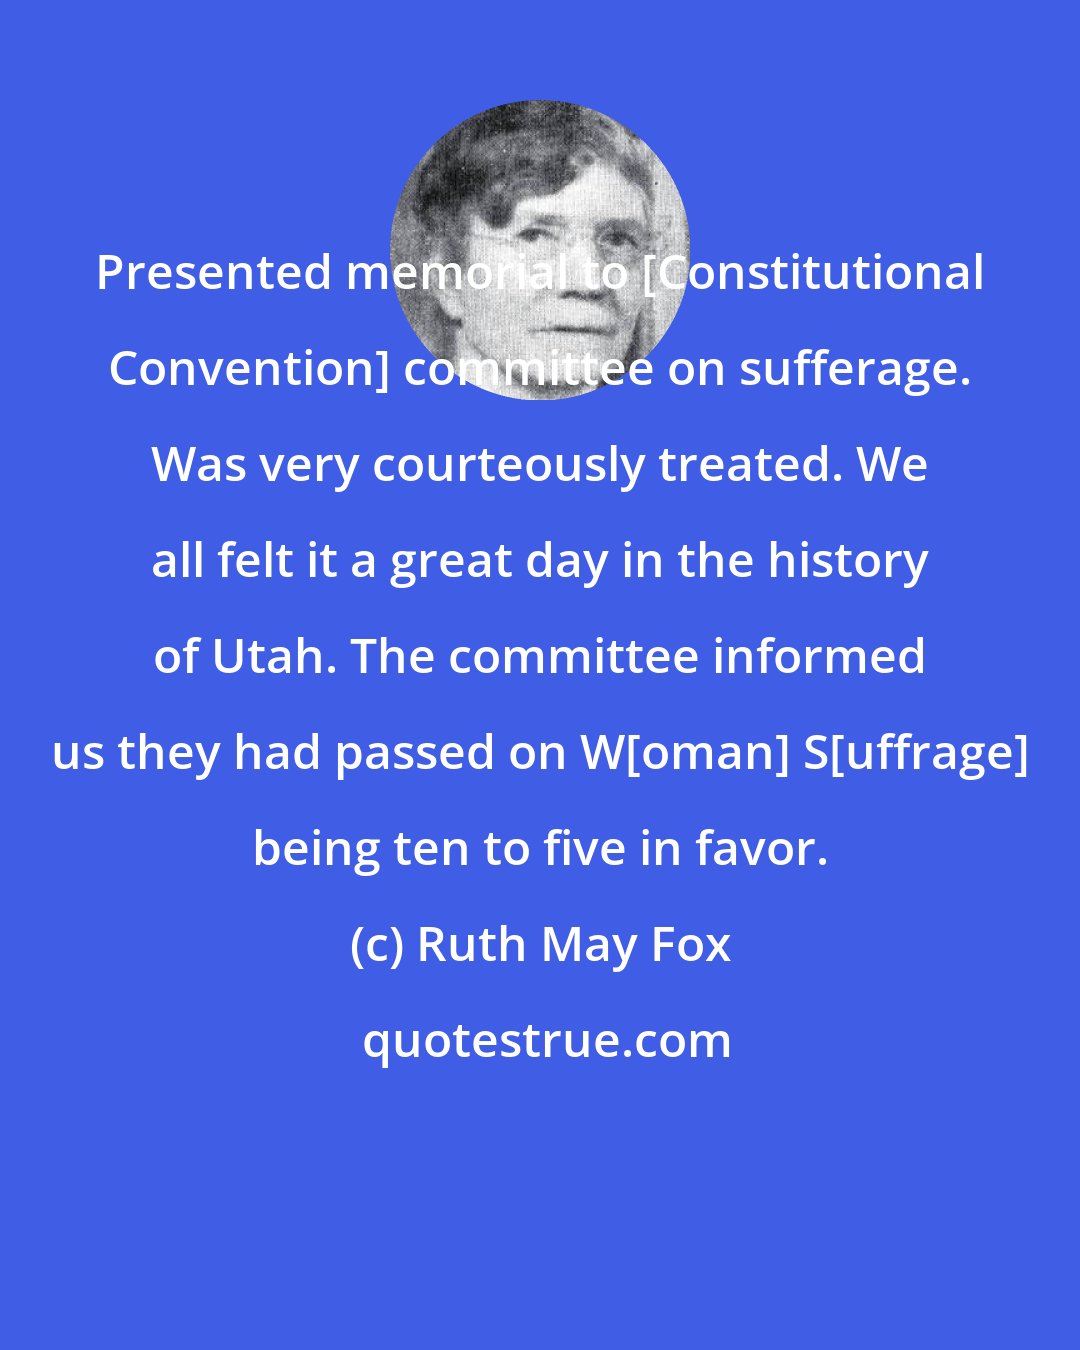 Ruth May Fox: Presented memorial to [Constitutional Convention] committee on sufferage. Was very courteously treated. We all felt it a great day in the history of Utah. The committee informed us they had passed on W[oman] S[uffrage] being ten to five in favor.